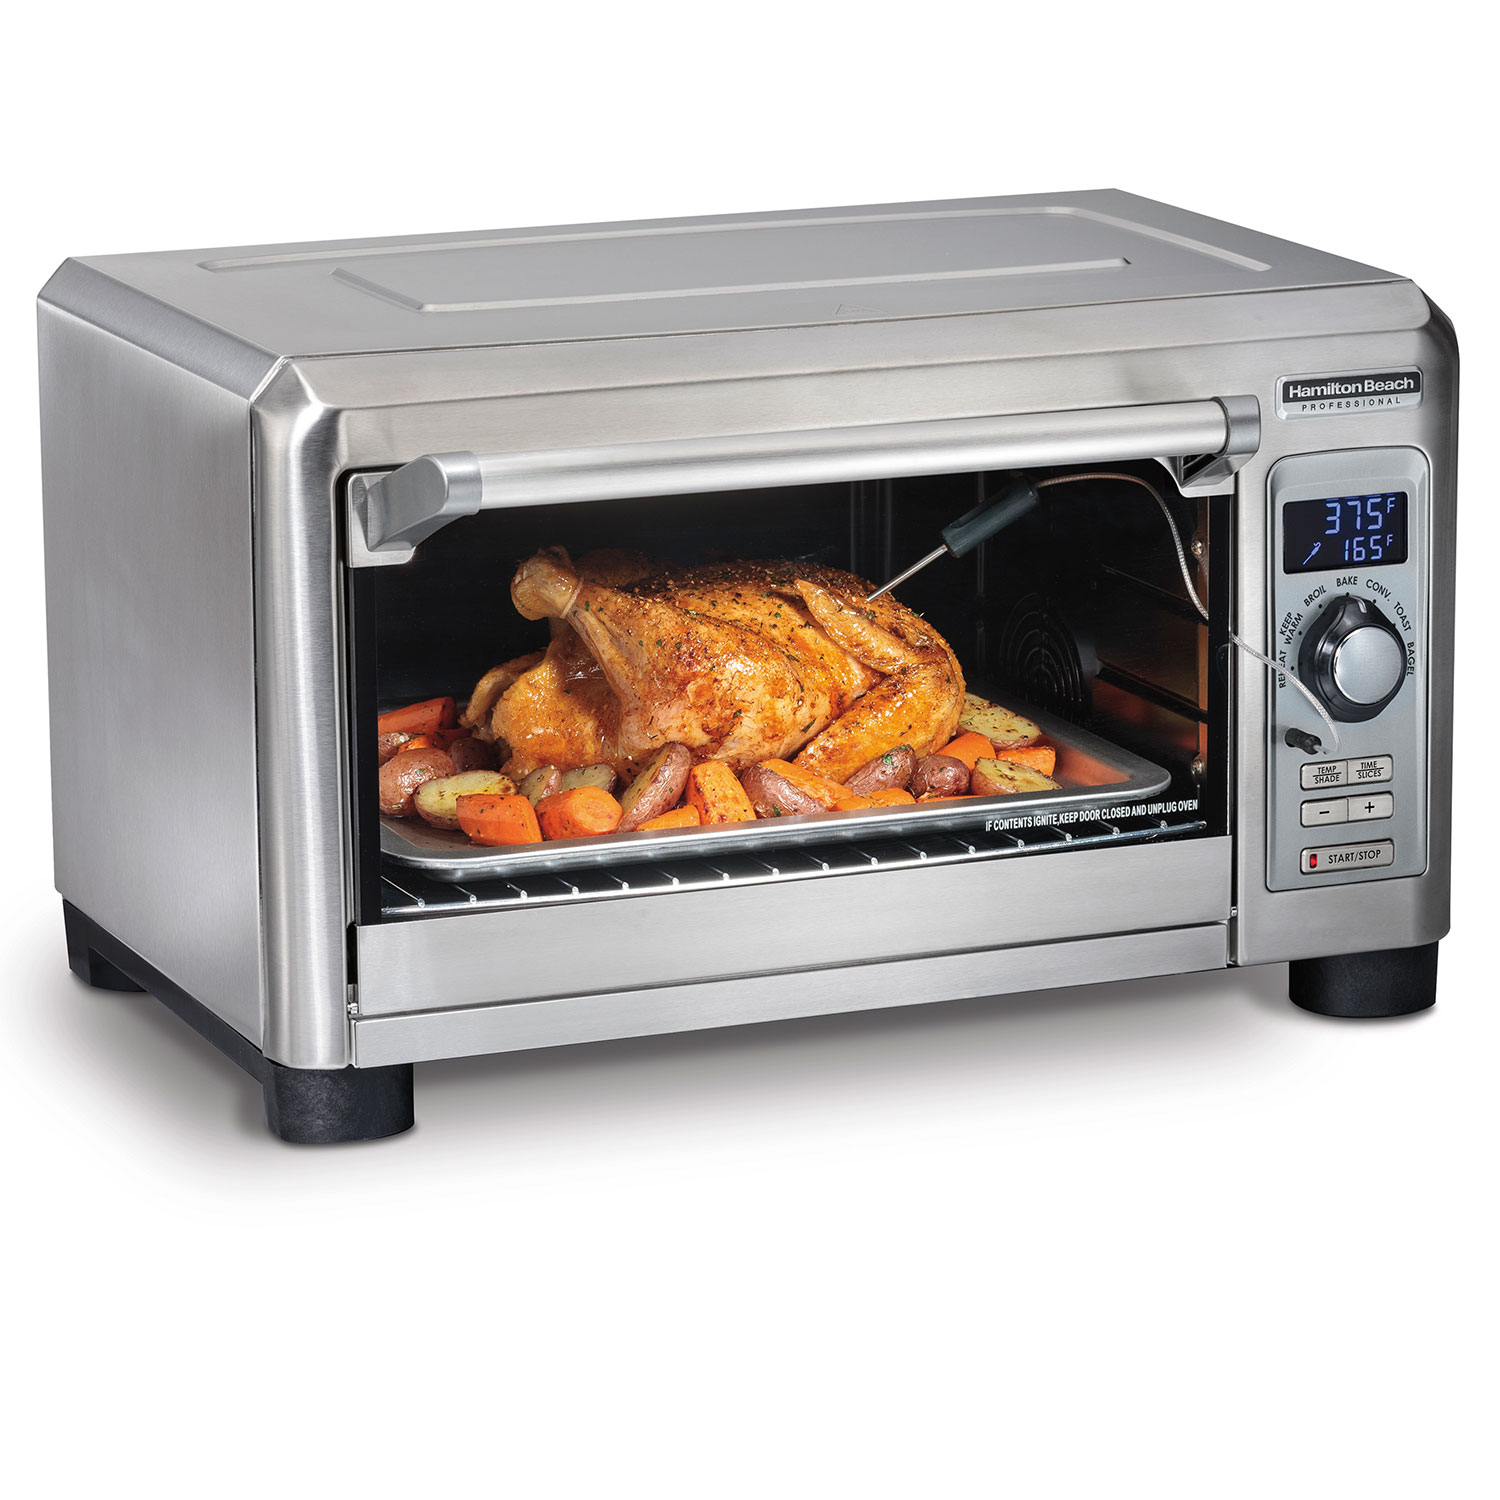 Purchase Digital Countertop Oven now